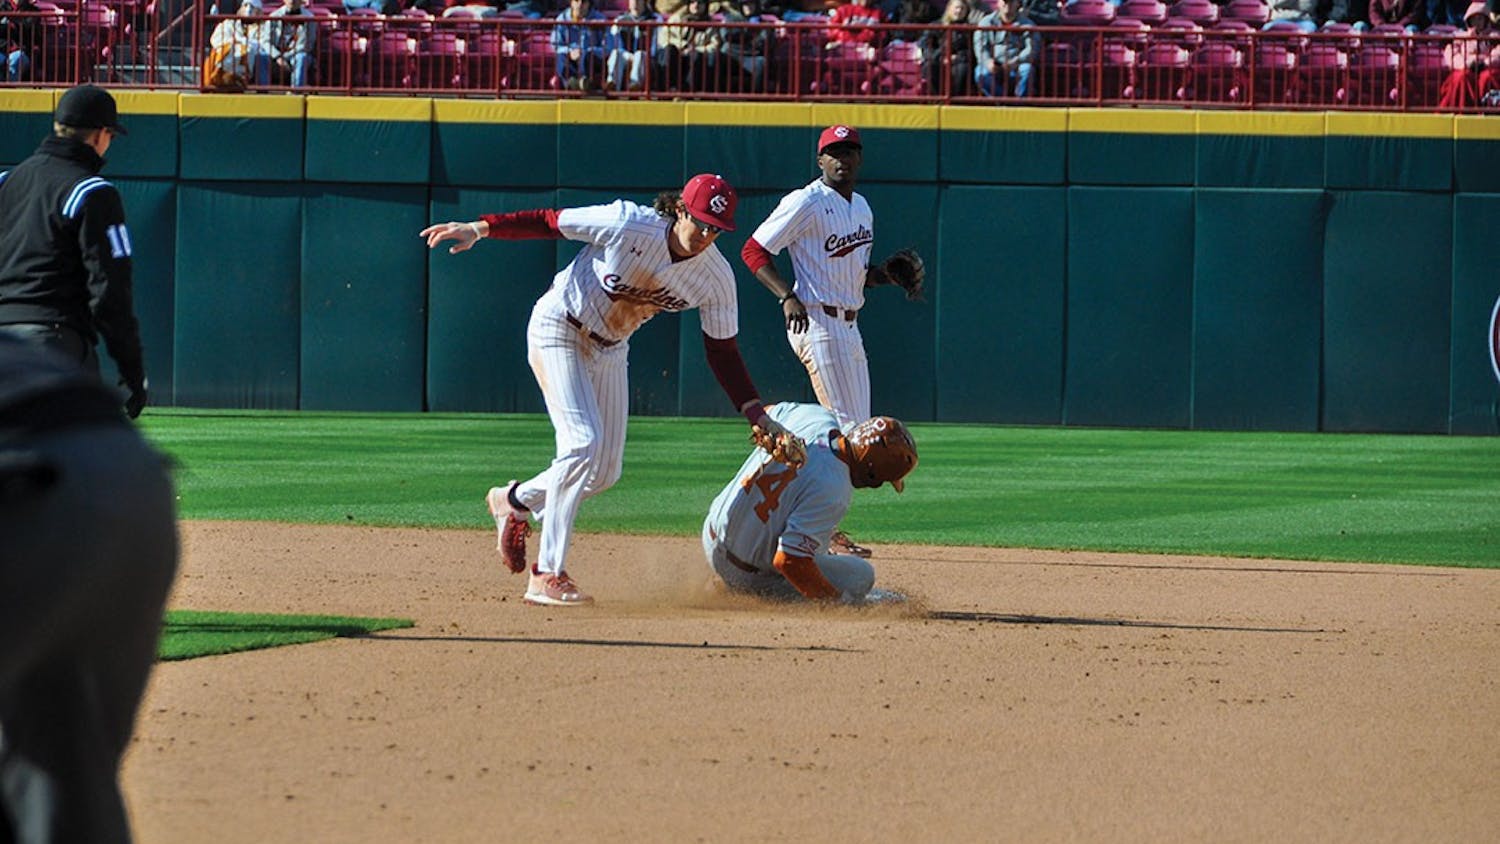 Junior infielder Braylen Wimmer attempts to catch Texas stealing second base on March 12, 2022. The Gamecocks beat the Longhorns, 3-2, during the series.